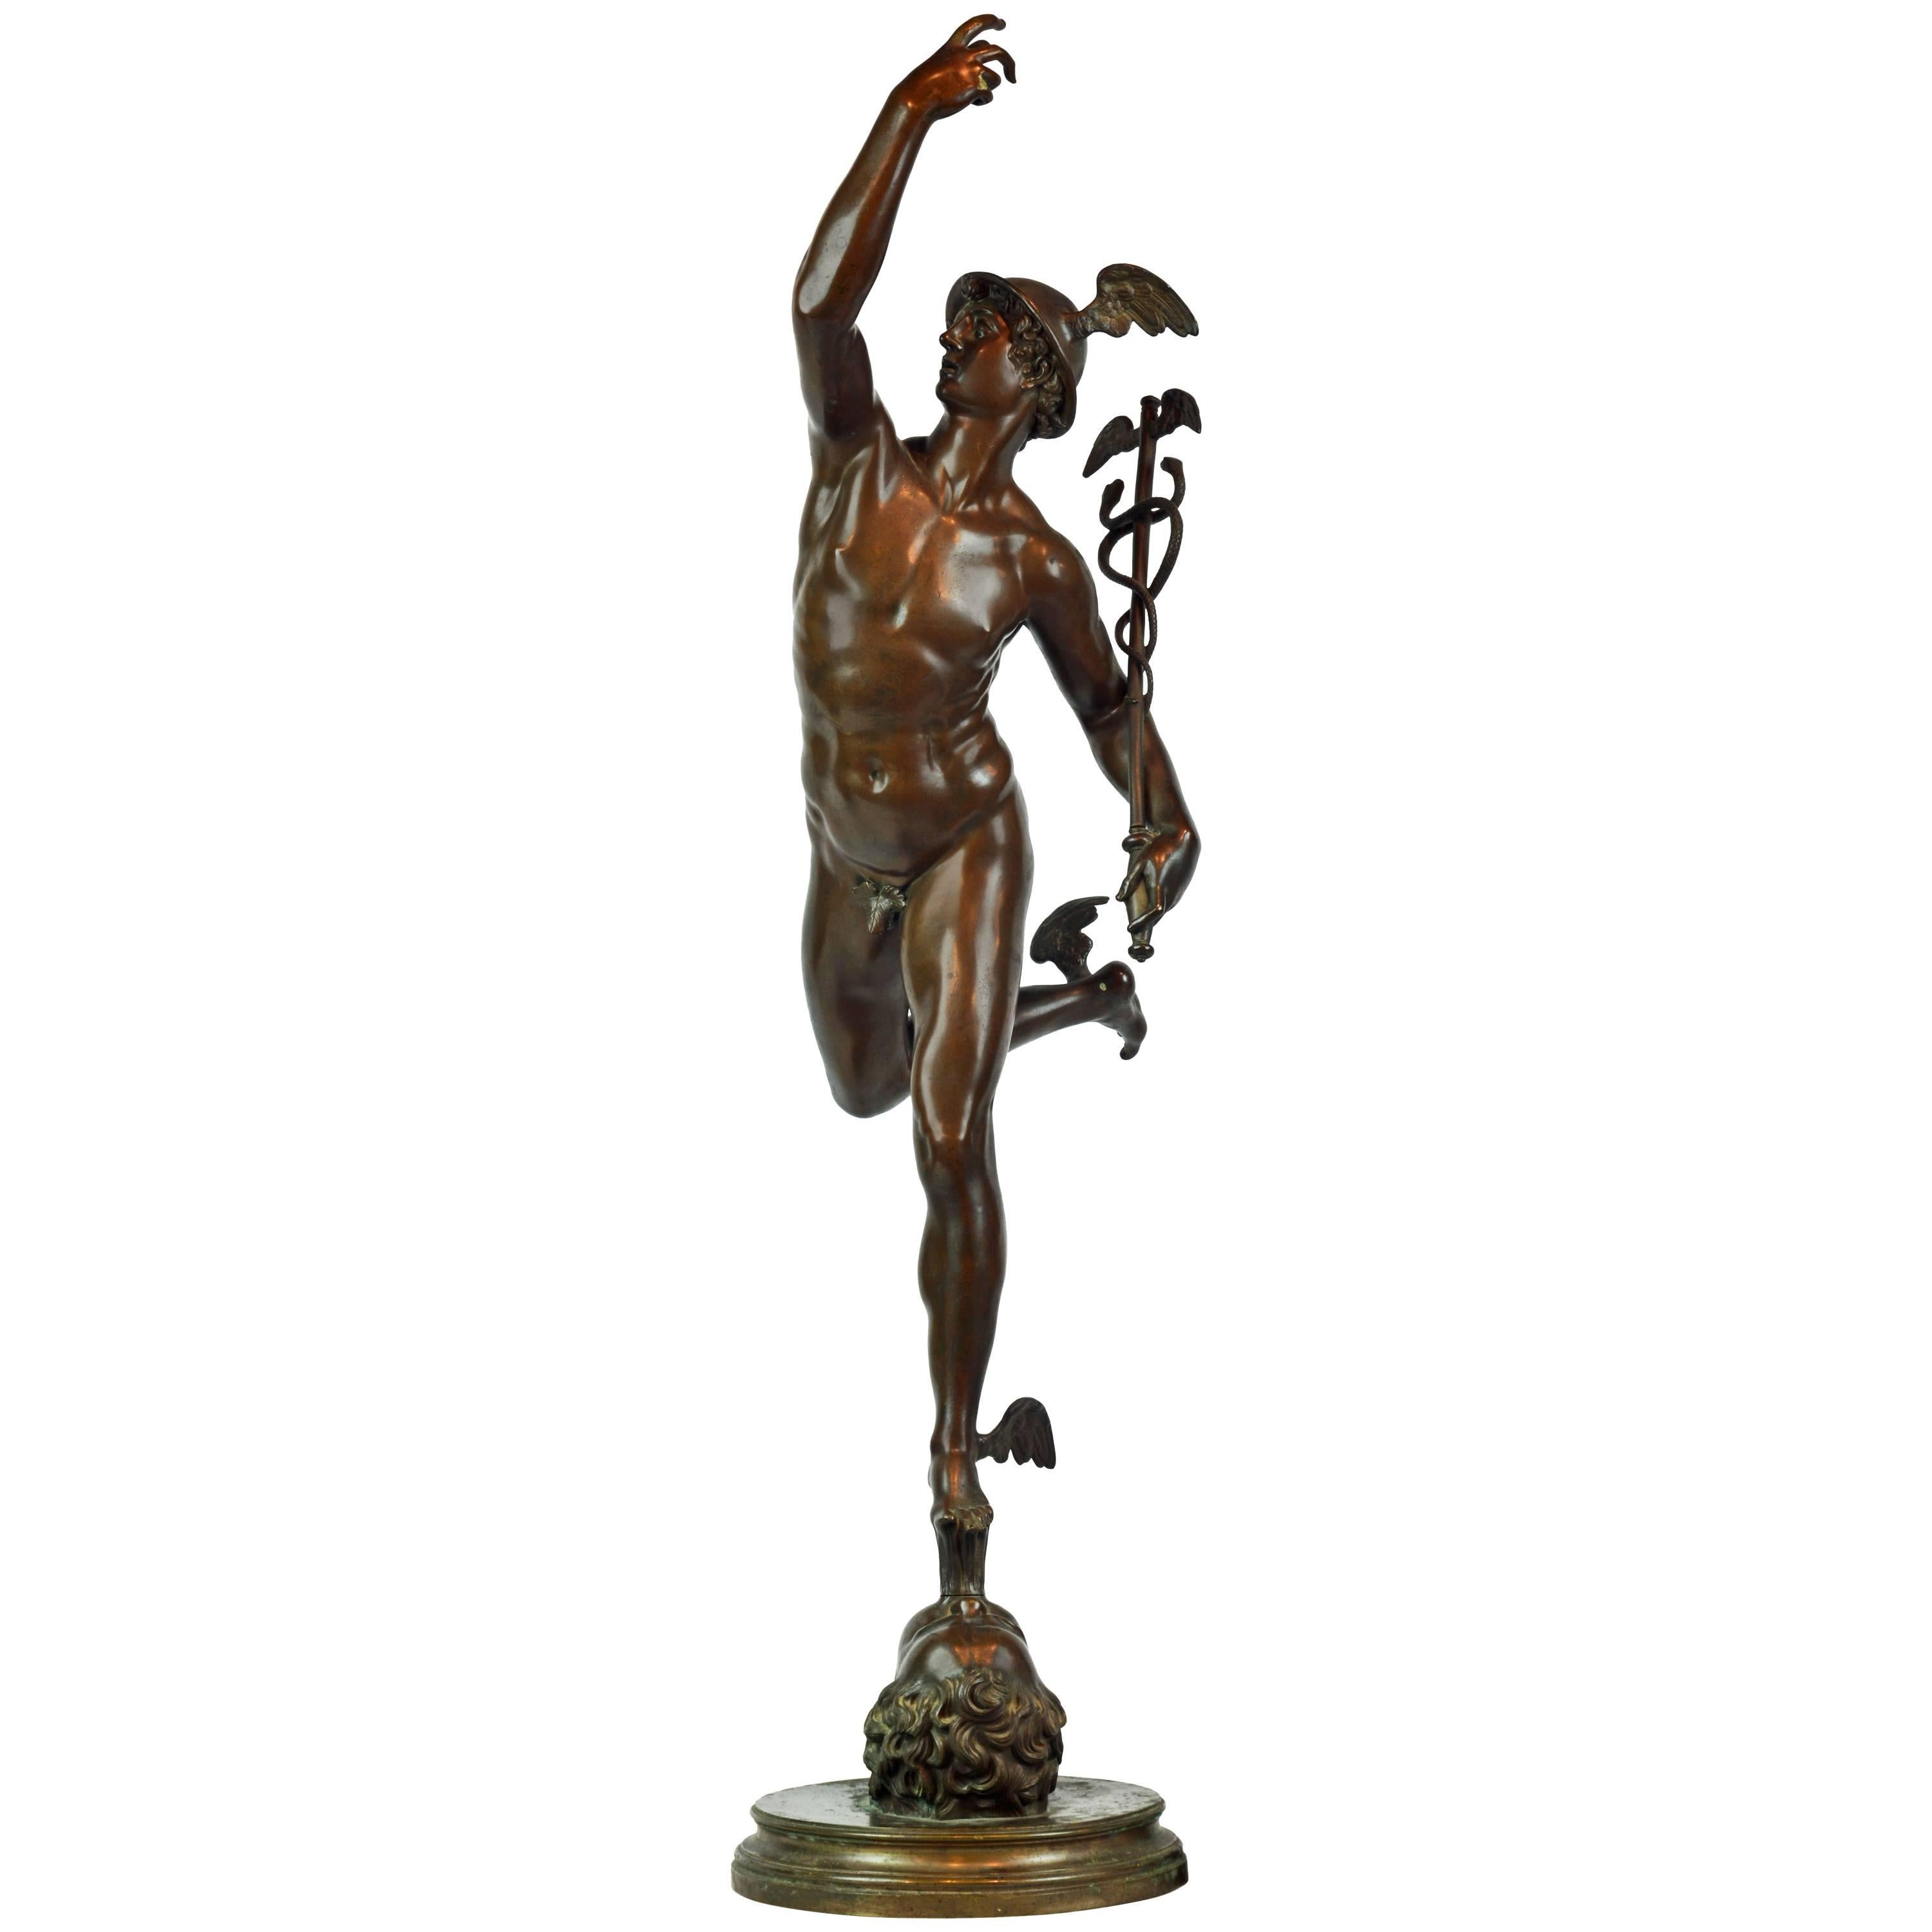 19th Century Giant Bronze Statue of the Flying Mercury after Giovanni da Bologna